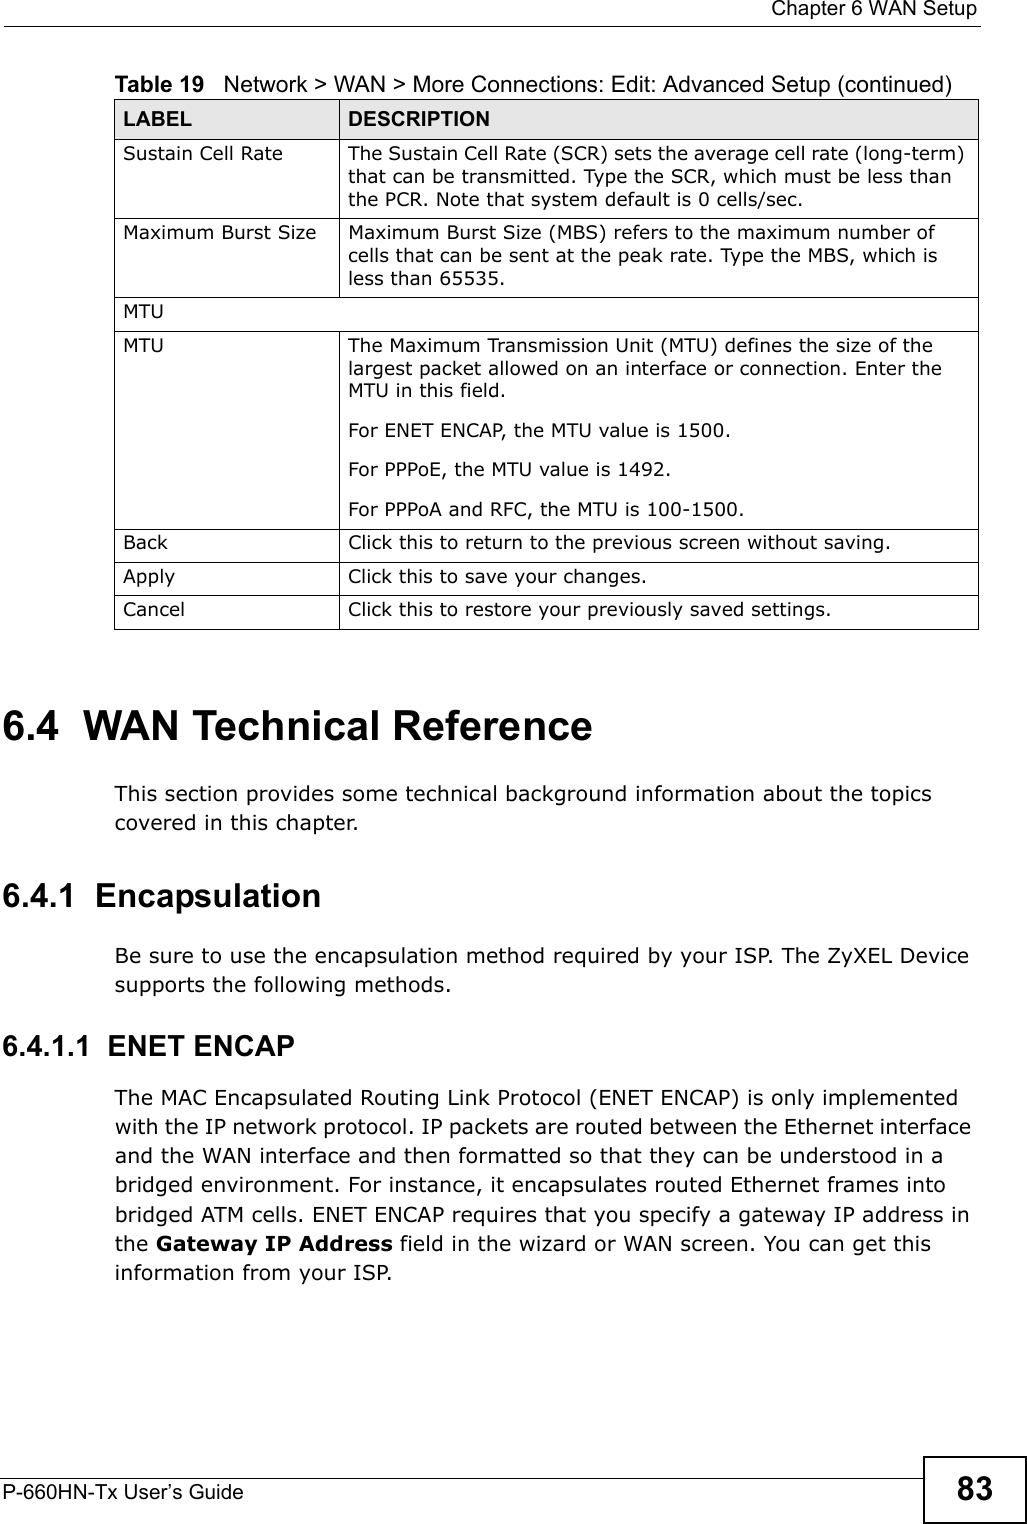  Chapter 6 WAN SetupP-660HN-Tx User’s Guide 836.4  WAN Technical ReferenceThis section provides some technical background information about the topics covered in this chapter.6.4.1  EncapsulationBe sure to use the encapsulation method required by your ISP. The ZyXEL Device supports the following methods.6.4.1.1  ENET ENCAPThe MAC Encapsulated Routing Link Protocol (ENET ENCAP) is only implemented with the IP network protocol. IP packets are routed between the Ethernet interface and the WAN interface and then formatted so that they can be understood in a bridged environment. For instance, it encapsulates routed Ethernet frames into bridged ATM cells. ENET ENCAP requires that you specify a gateway IP address in the Gateway IP Address field in the wizard or WAN screen. You can get this information from your ISP.Sustain Cell Rate The Sustain Cell Rate (SCR) sets the average cell rate (long-term) that can be transmitted. Type the SCR, which must be less than the PCR. Note that system default is 0 cells/sec. Maximum Burst Size Maximum Burst Size (MBS) refers to the maximum number of cells that can be sent at the peak rate. Type the MBS, which is less than 65535. MTUMTU The Maximum Transmission Unit (MTU) defines the size of the largest packet allowed on an interface or connection. Enter the MTU in this field.For ENET ENCAP, the MTU value is 1500.For PPPoE, the MTU value is 1492.For PPPoA and RFC, the MTU is 100-1500.Back Click this to return to the previous screen without saving.Apply Click this to save your changes. Cancel Click this to restore your previously saved settings.Table 19   Network &gt; WAN &gt; More Connections: Edit: Advanced Setup (continued)LABEL DESCRIPTION